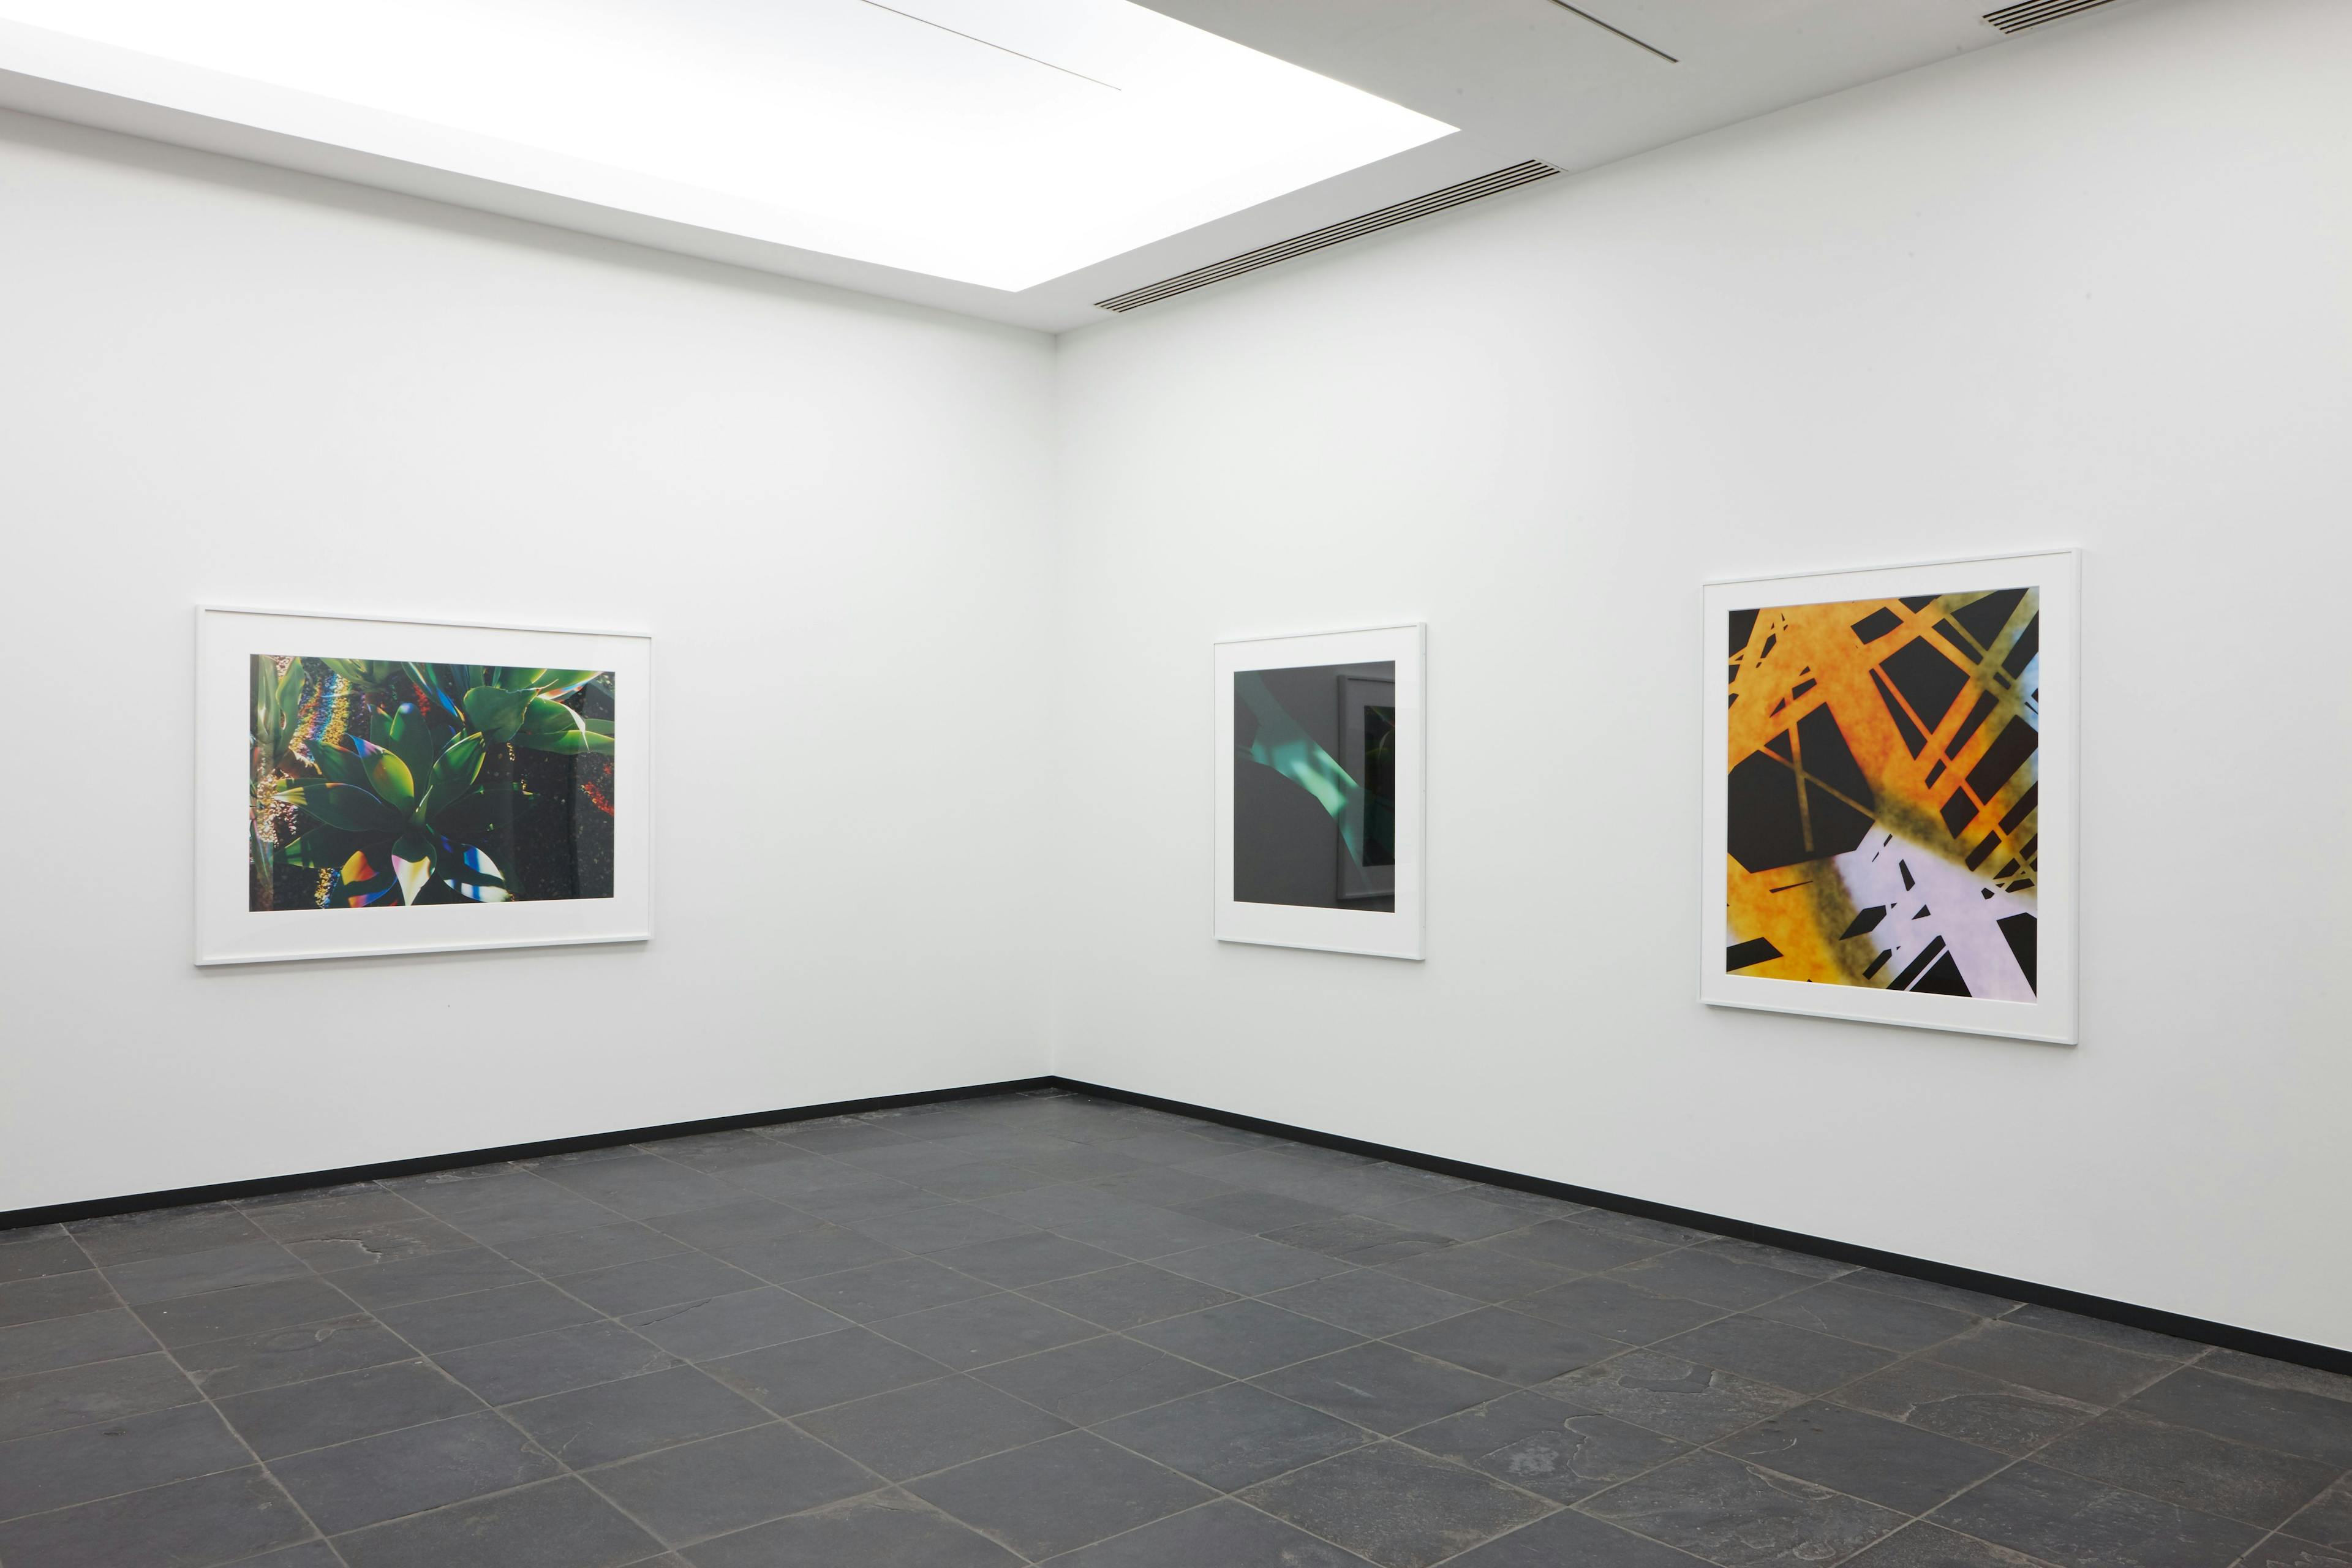 Installation view of the exhibition titled Metamorphosis at S.M.A.K. in Ghent, Belgium, dated 2017.